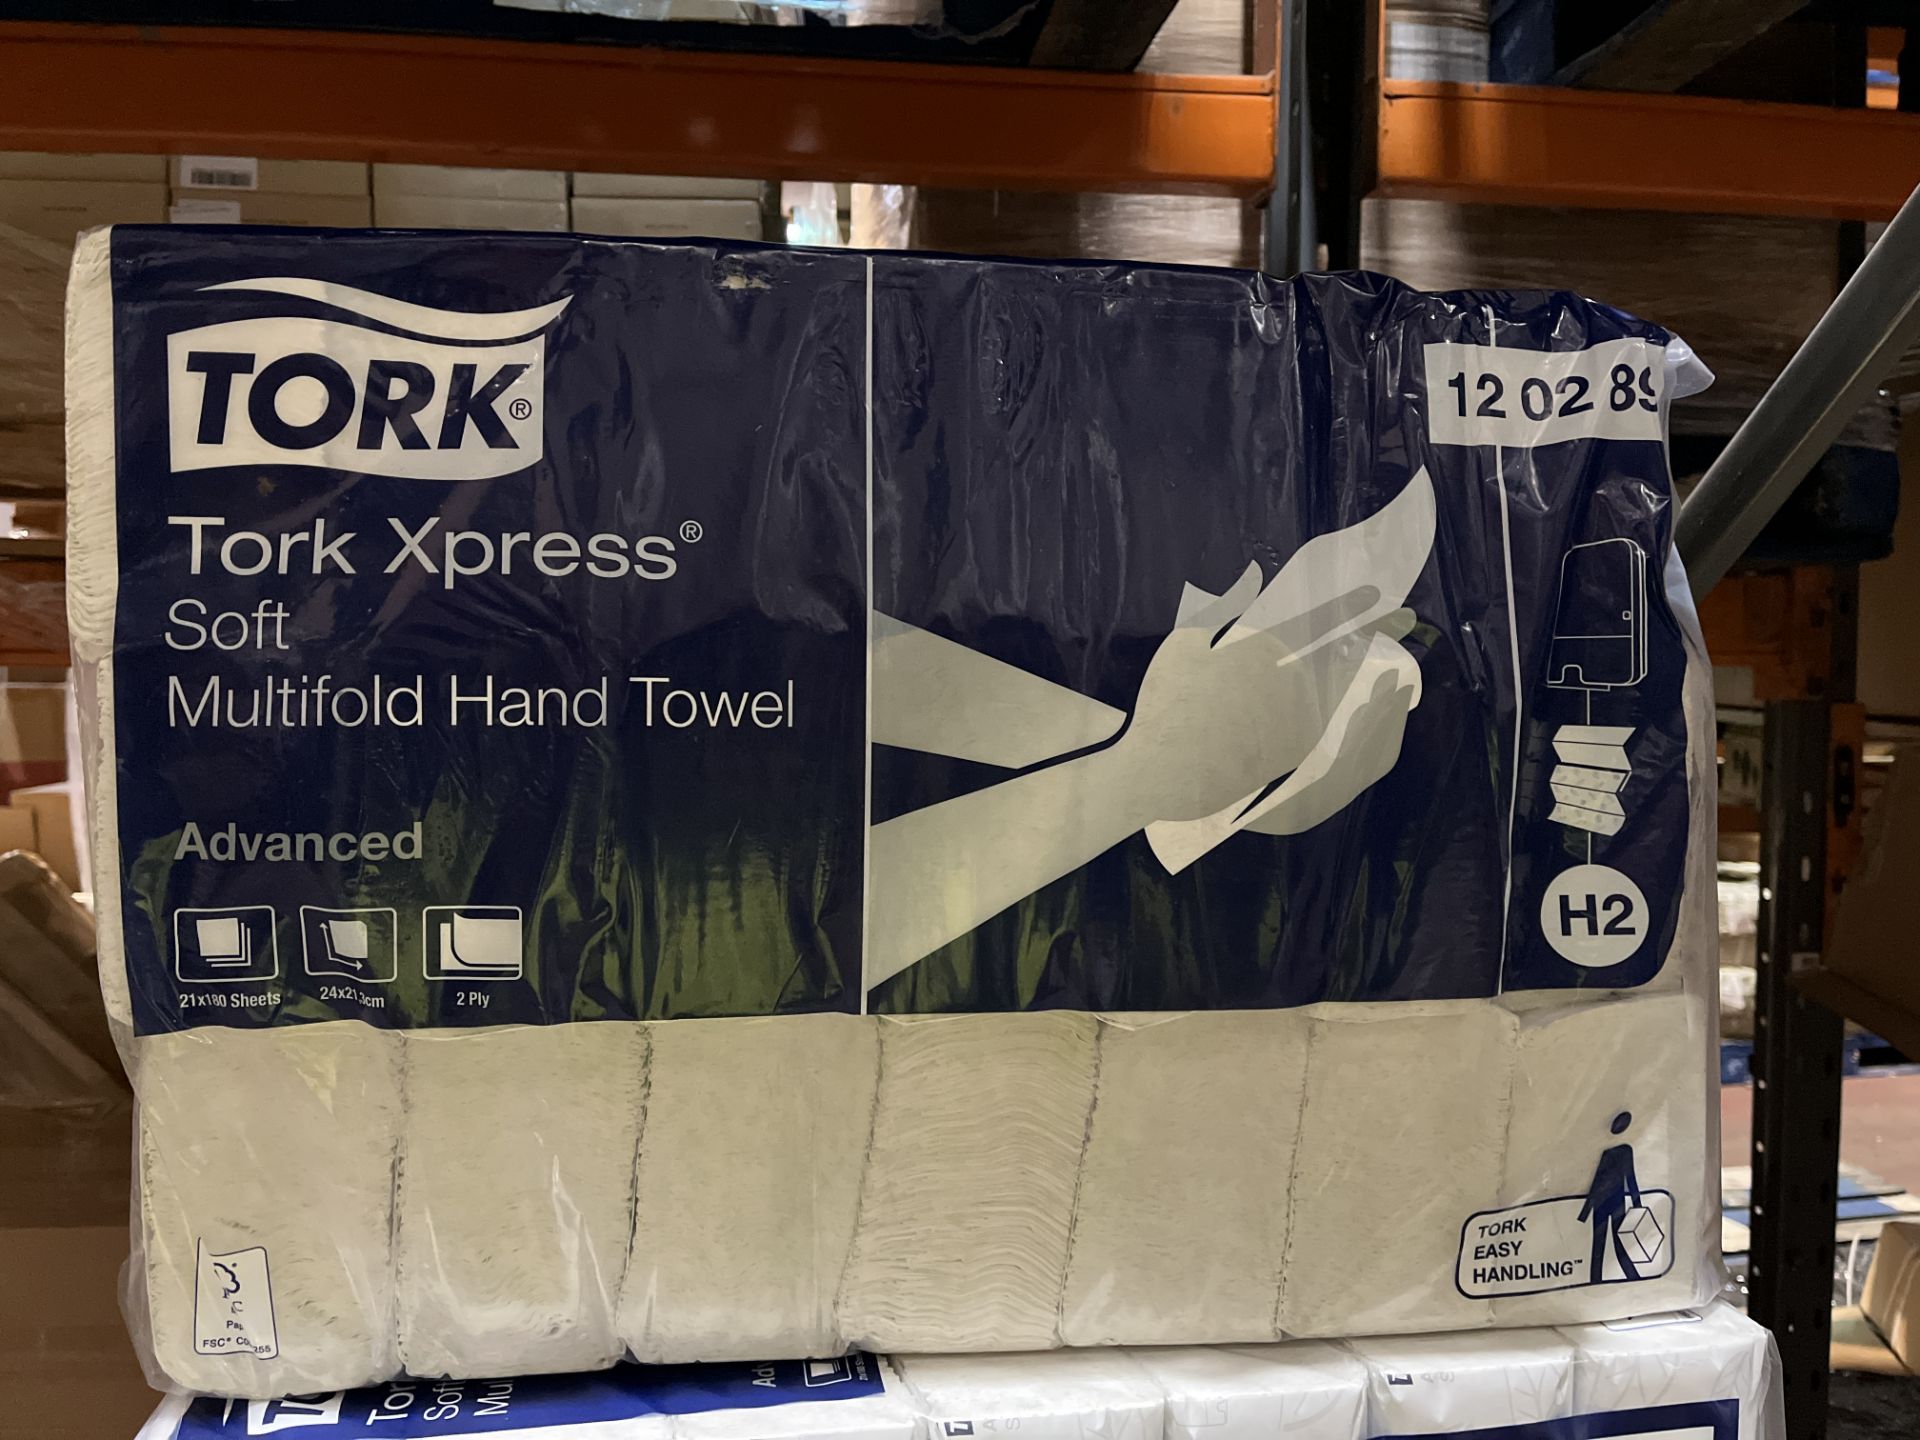 2 X BRAND NEW TORK PACK OF 21 ADVANCED INTERFOLD HAND TOWEL 2 PLY 120289 RRP £120 PER PACK R11-5